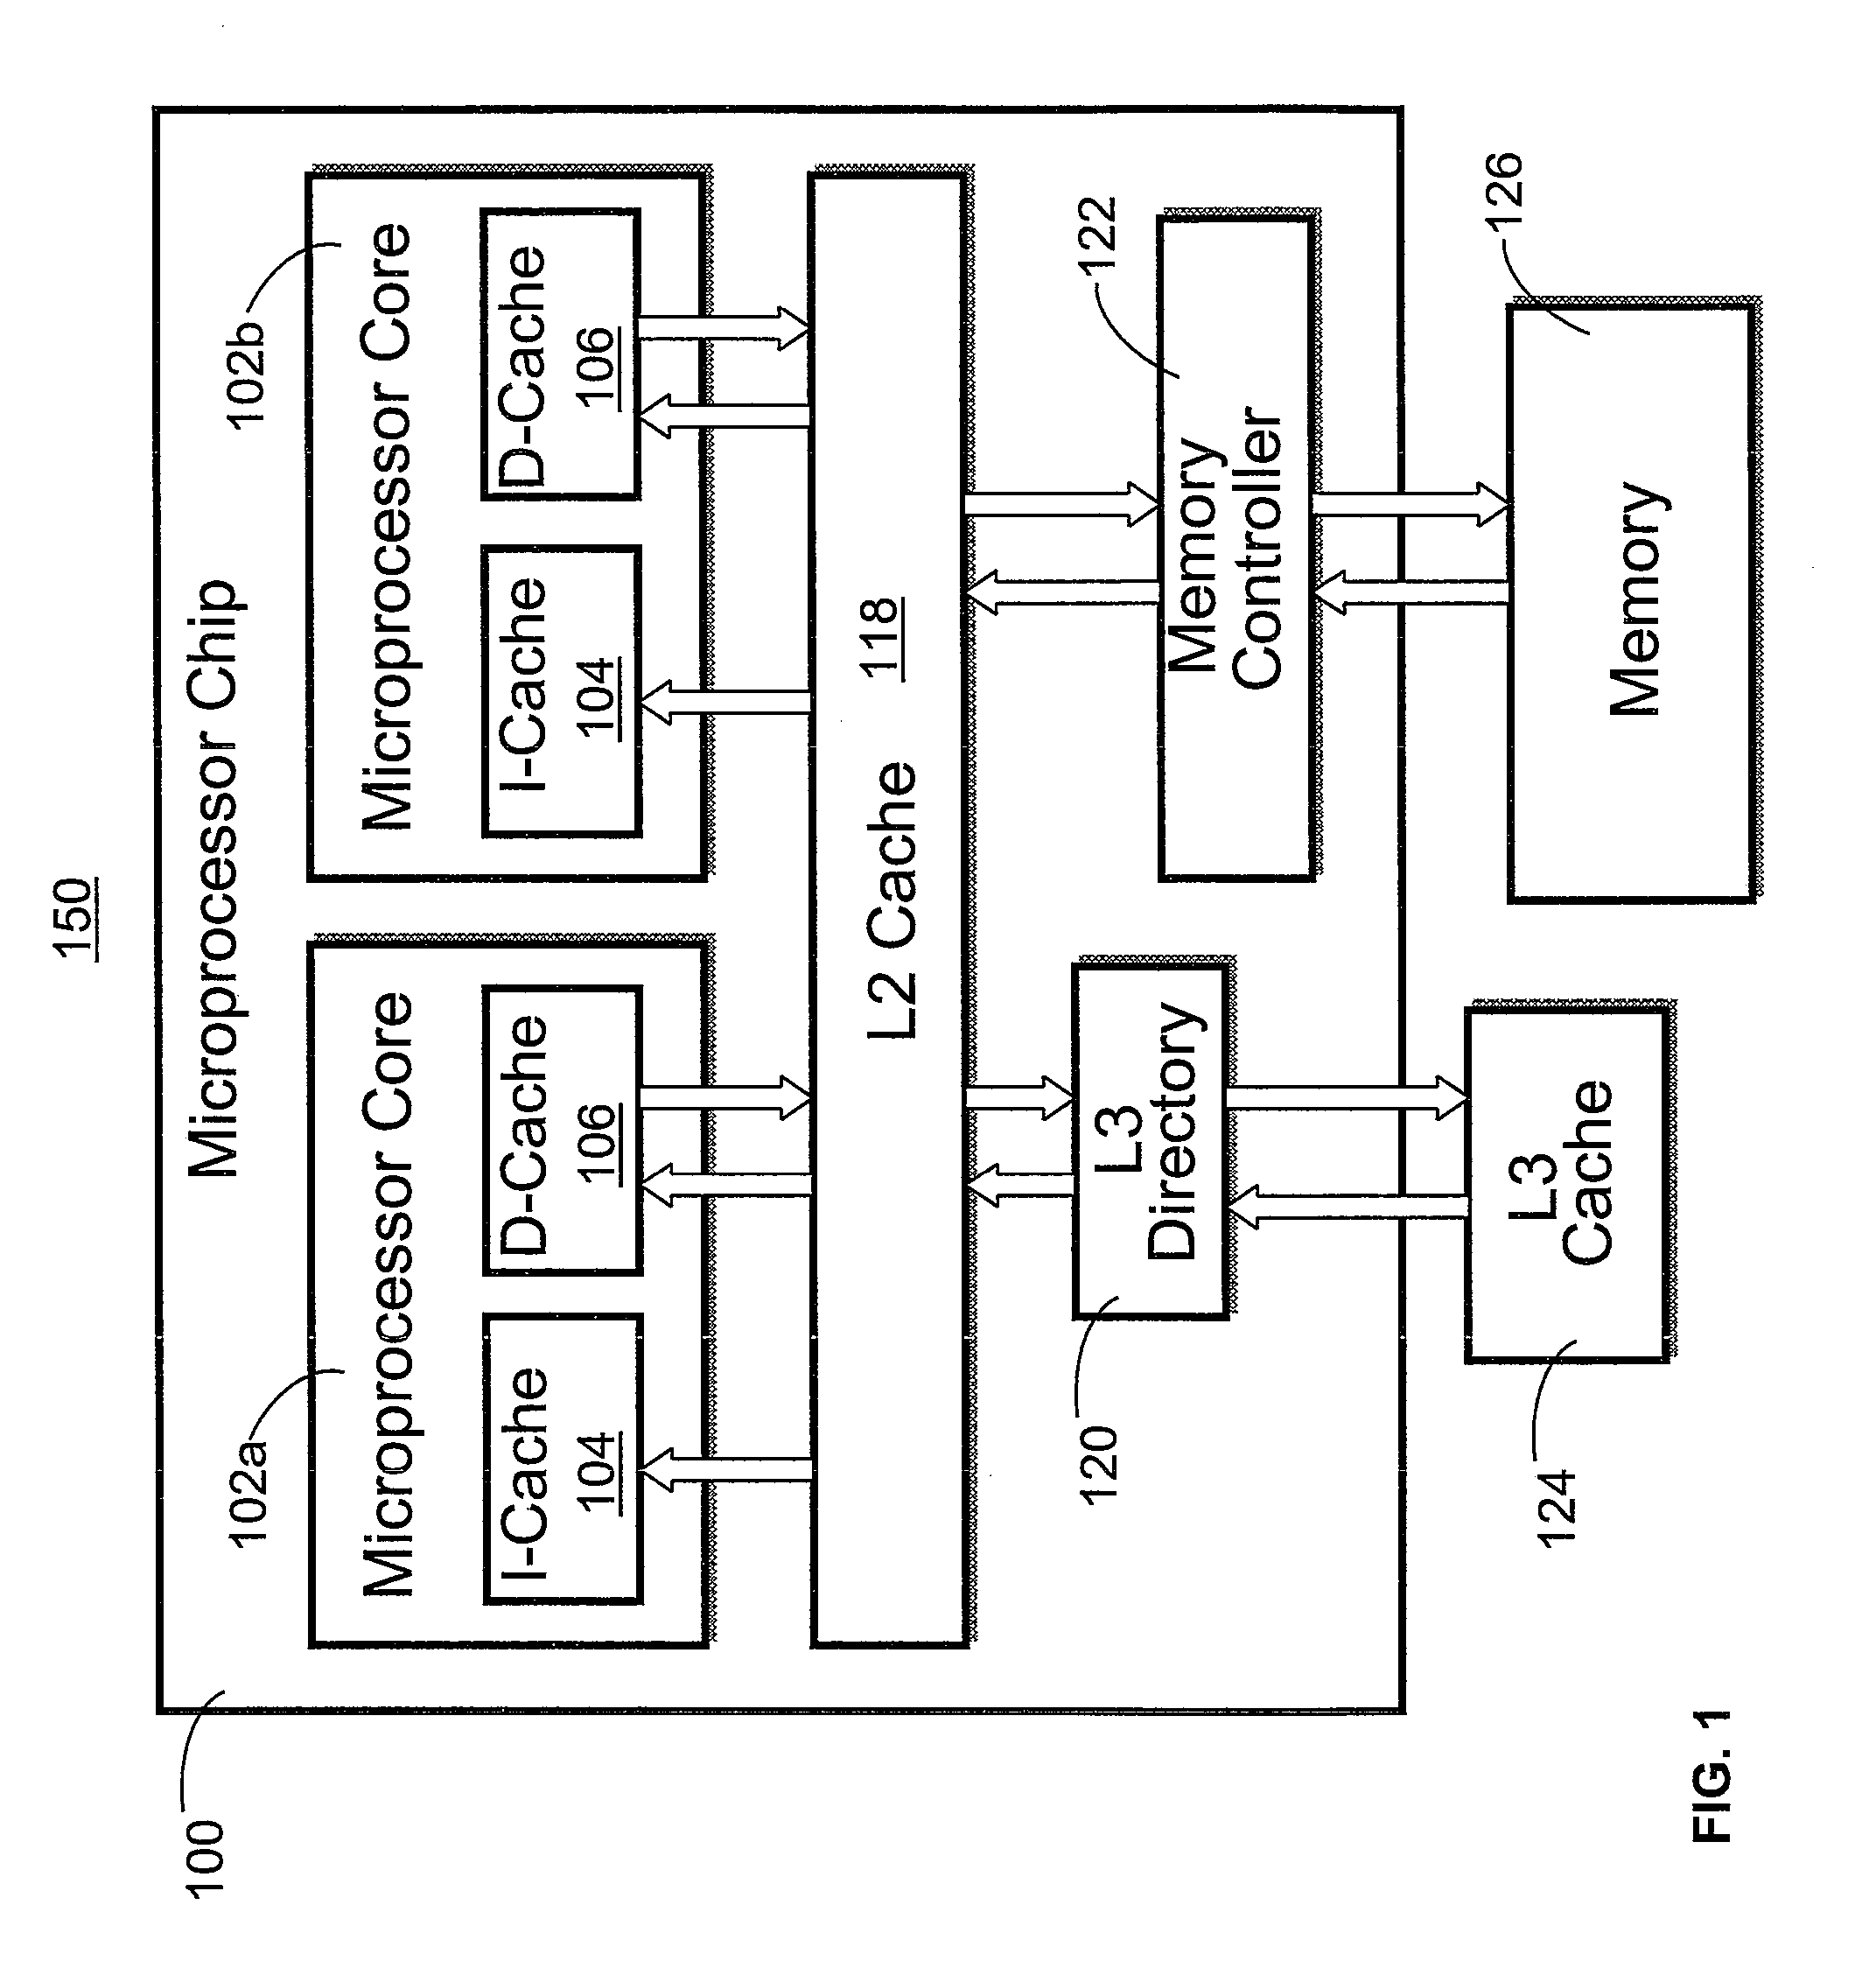 Design structure for improving efficiency of short loop instruction fetch